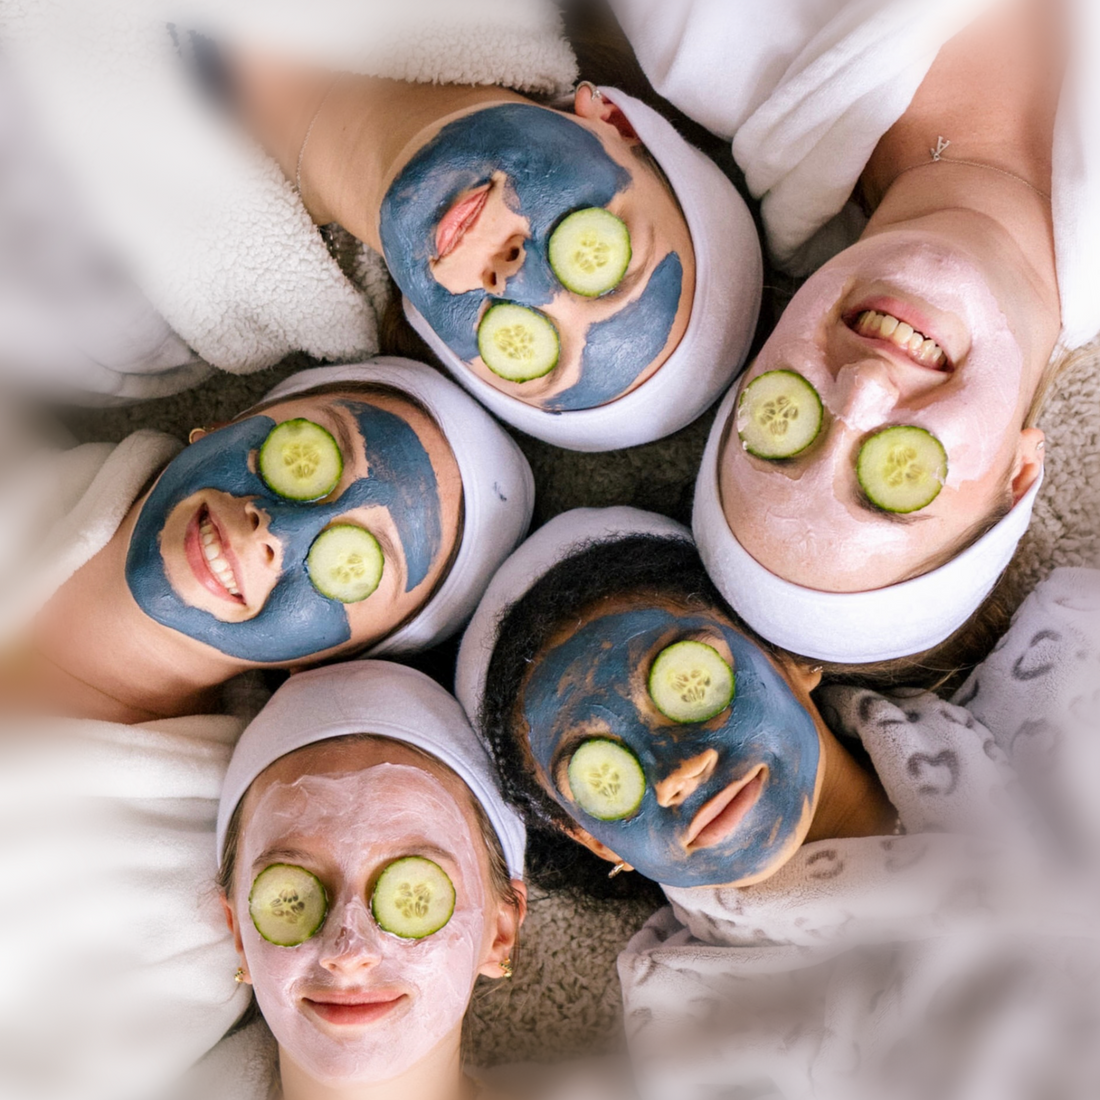 5 Teen girls with face packs on and cucumber slices covering their eyes, lying on the floor with their heads all touching. The girls are smiling.